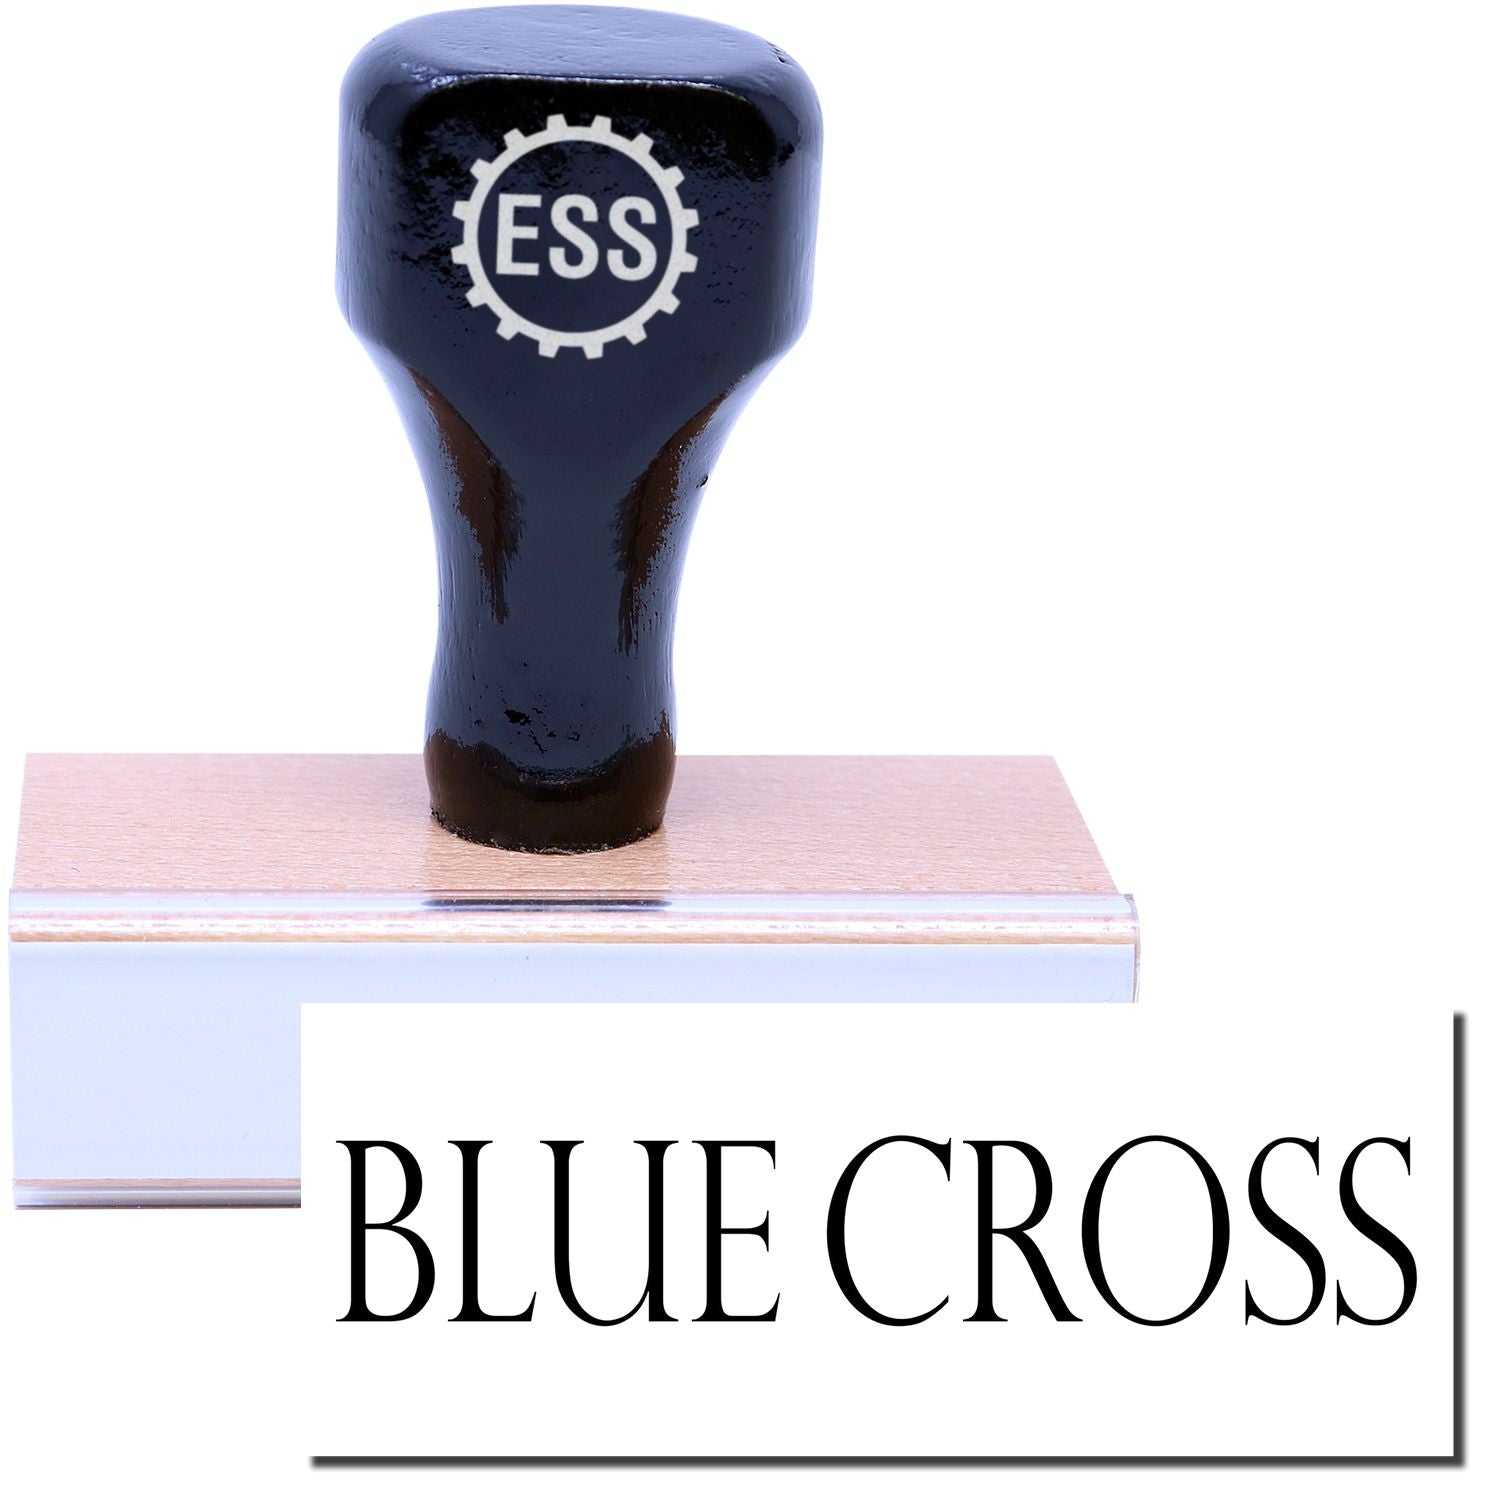 A stock office rubber stamp with a stamped image showing how the text "BLUE CROSS" is displayed after stamping.